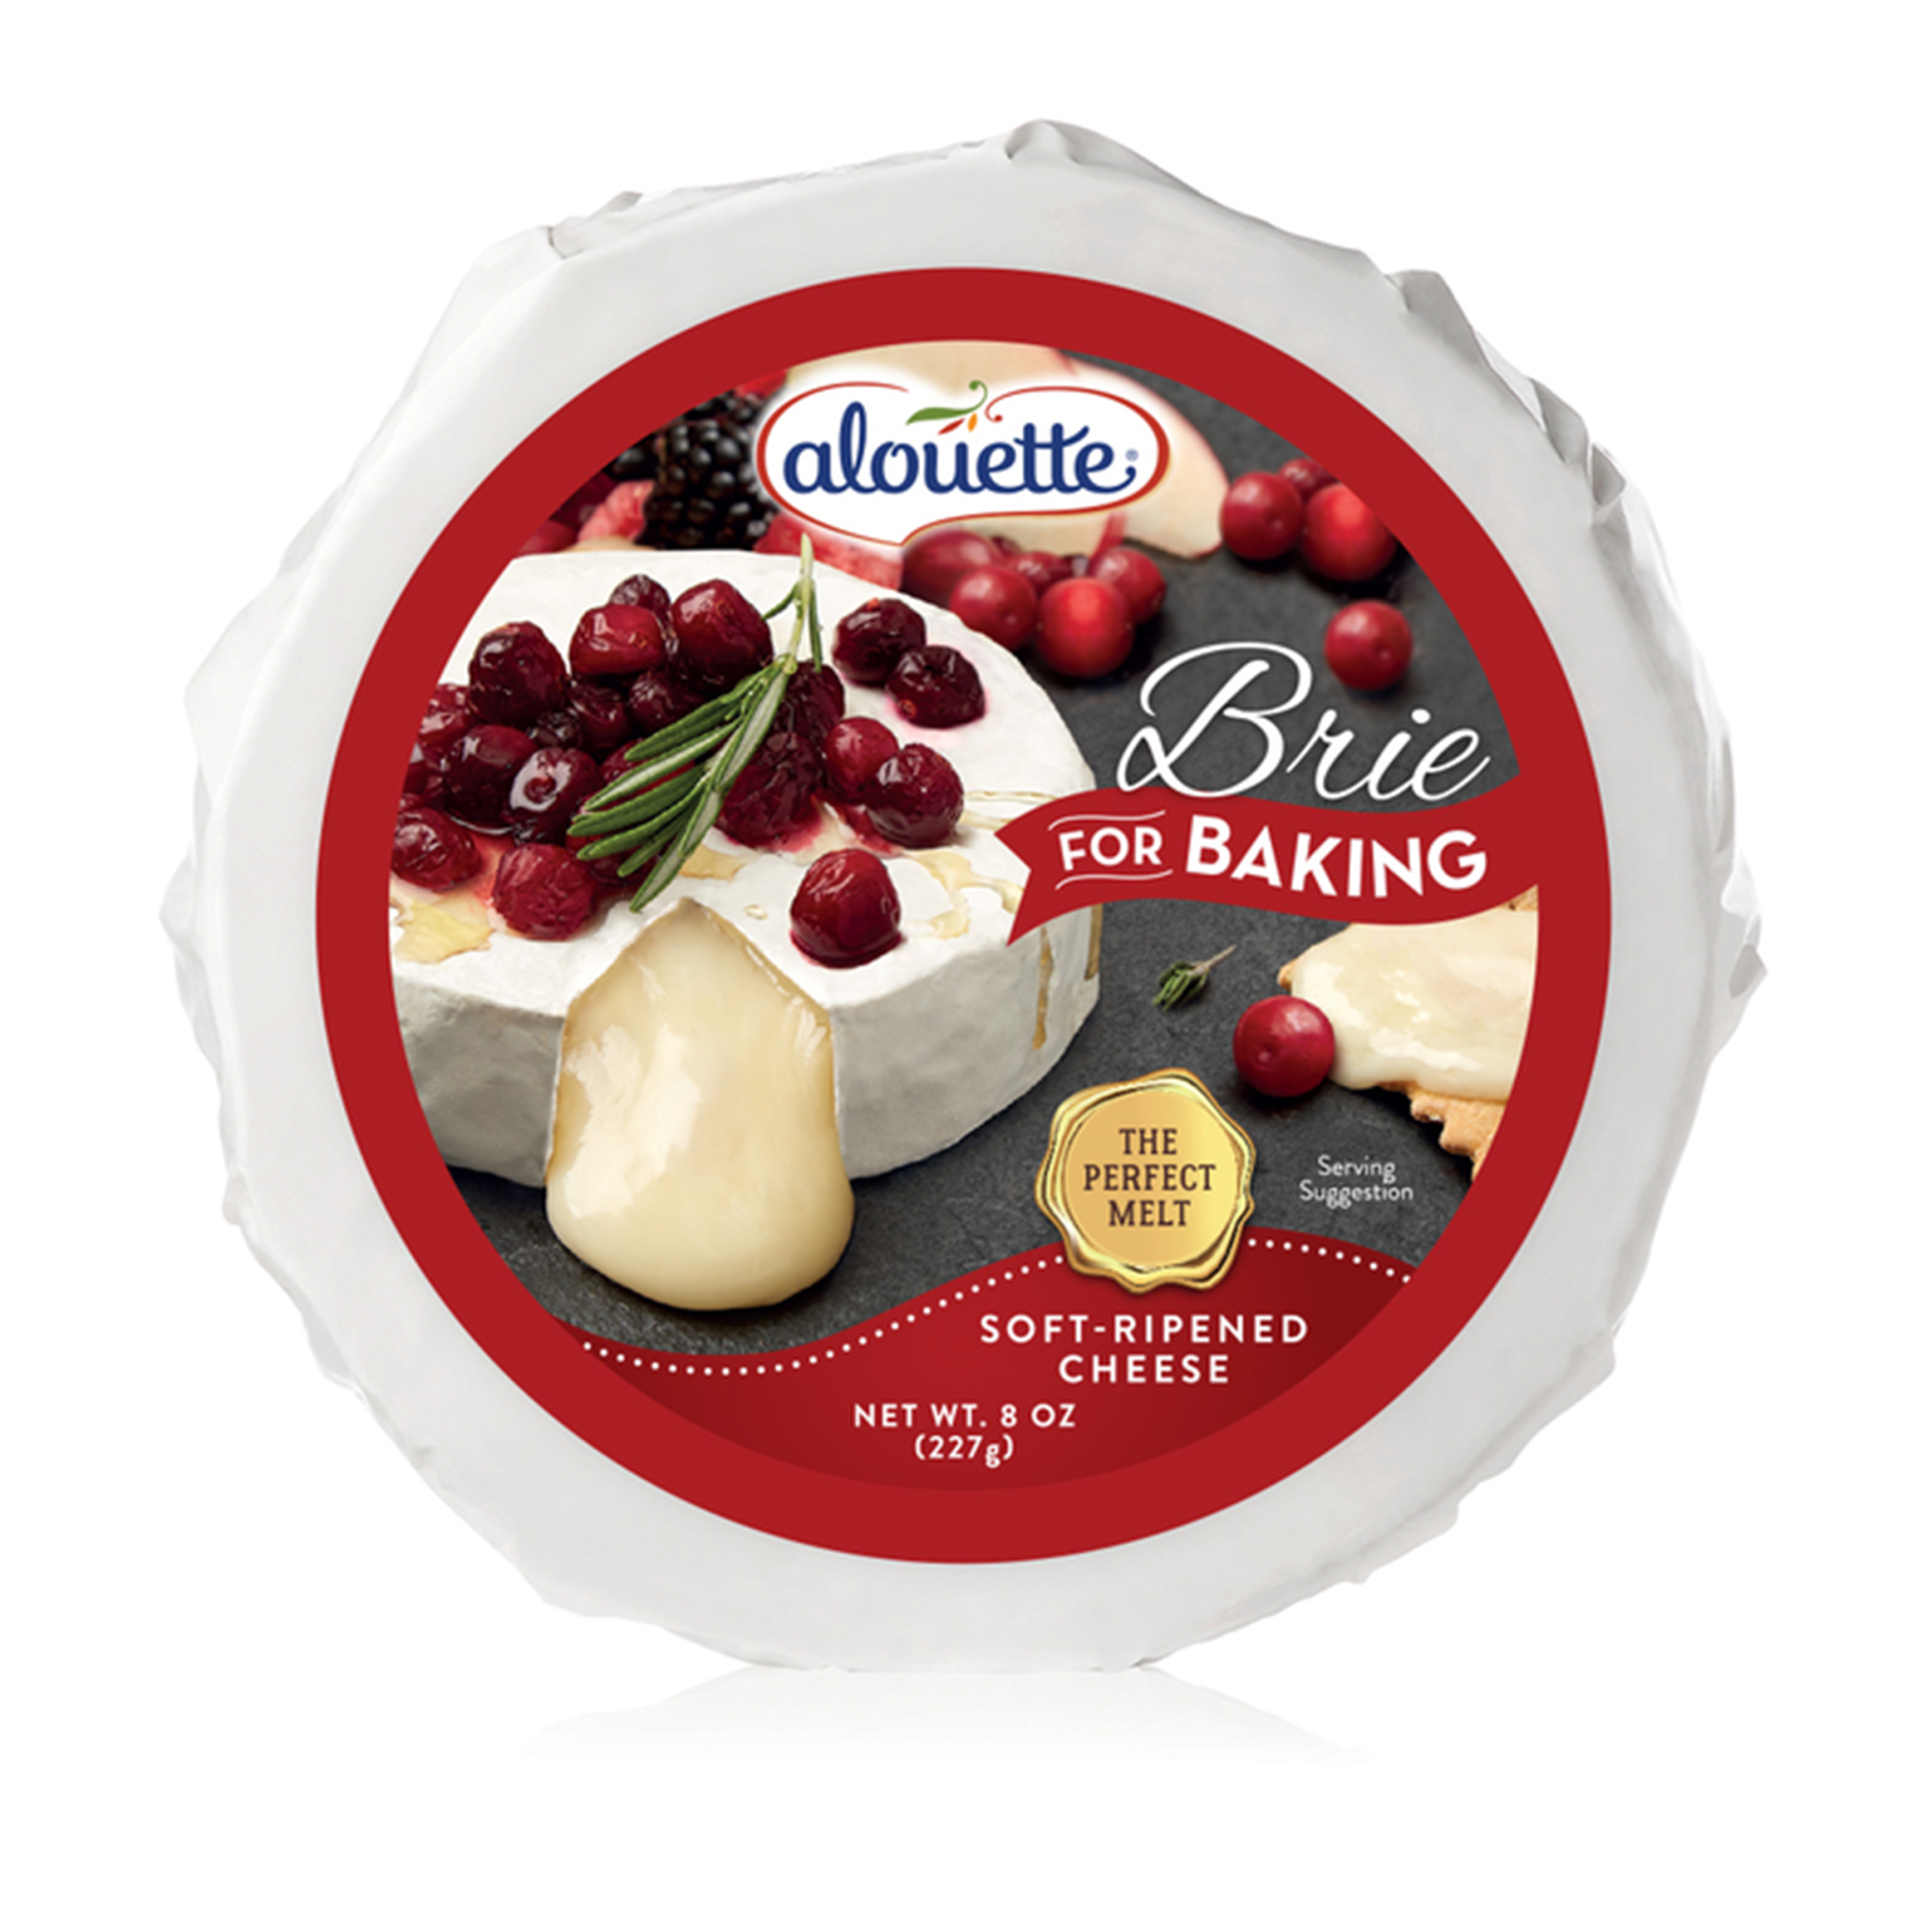 Alouette Brie For Baking 8oz - Limited Edition 